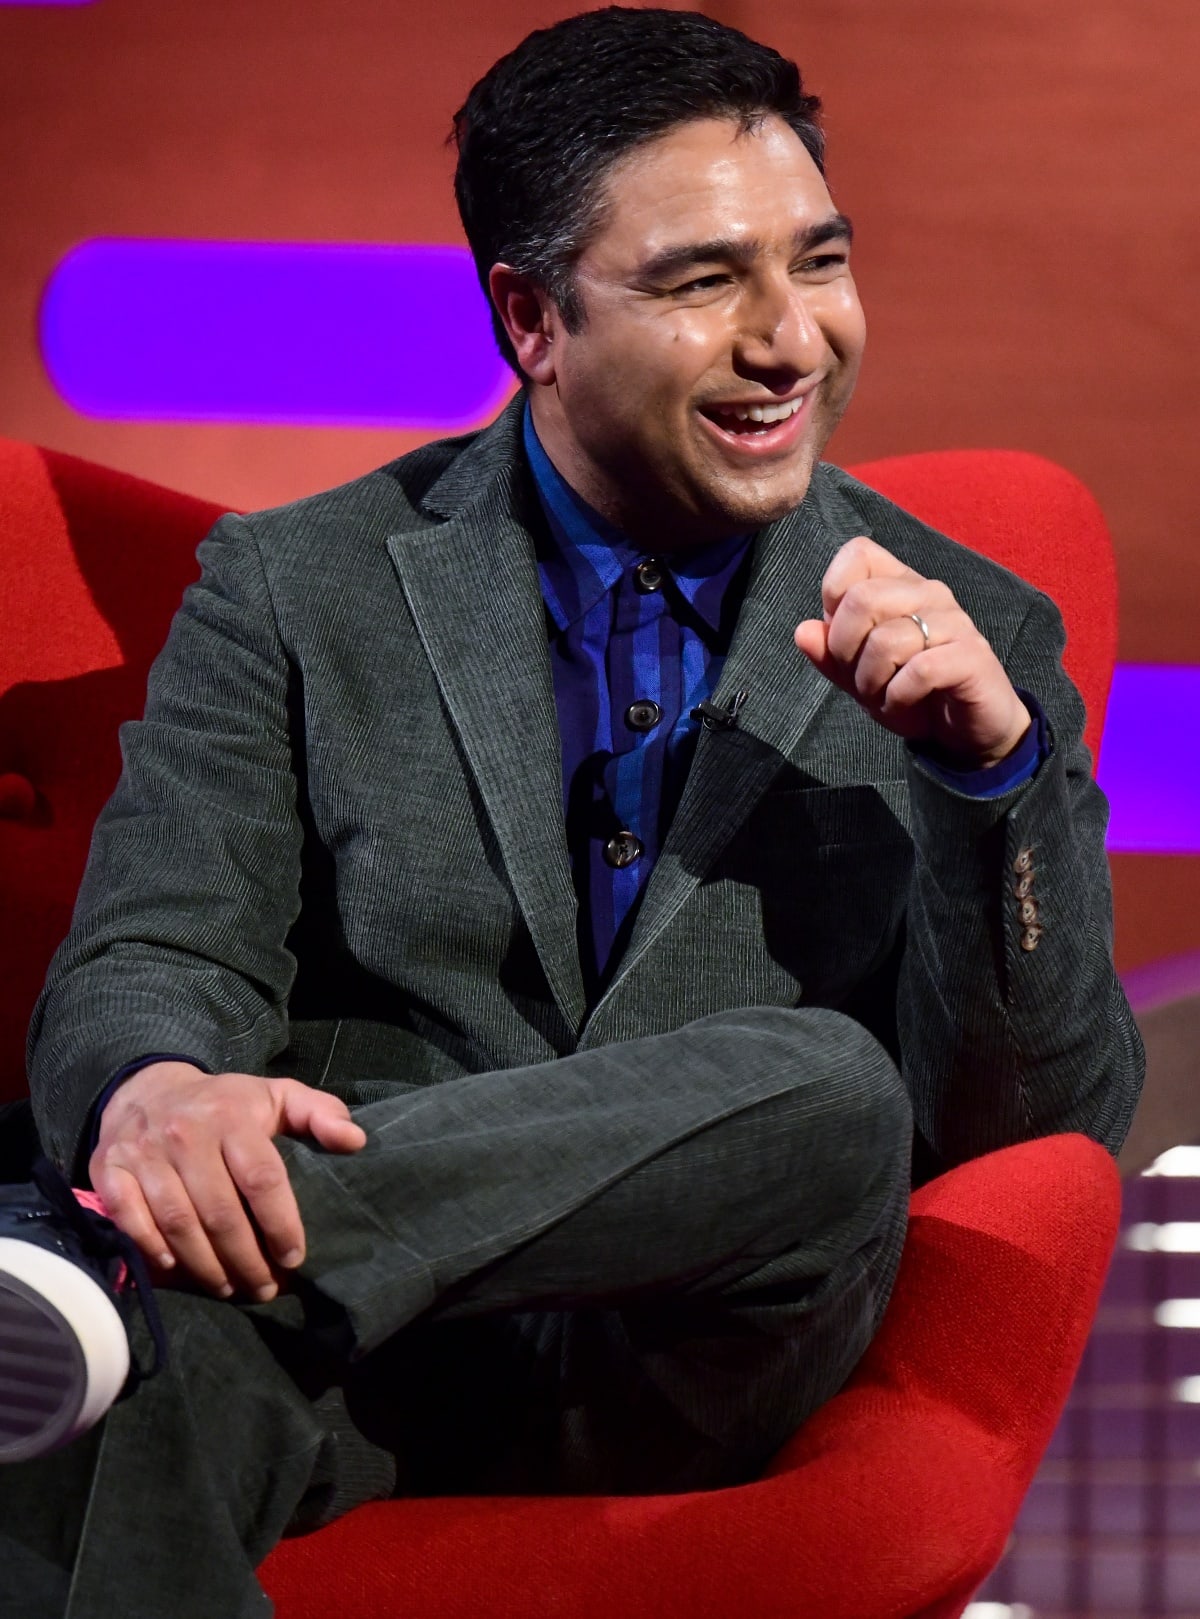 Nick Mohammed making a guest appearance on The Graham Norton Show